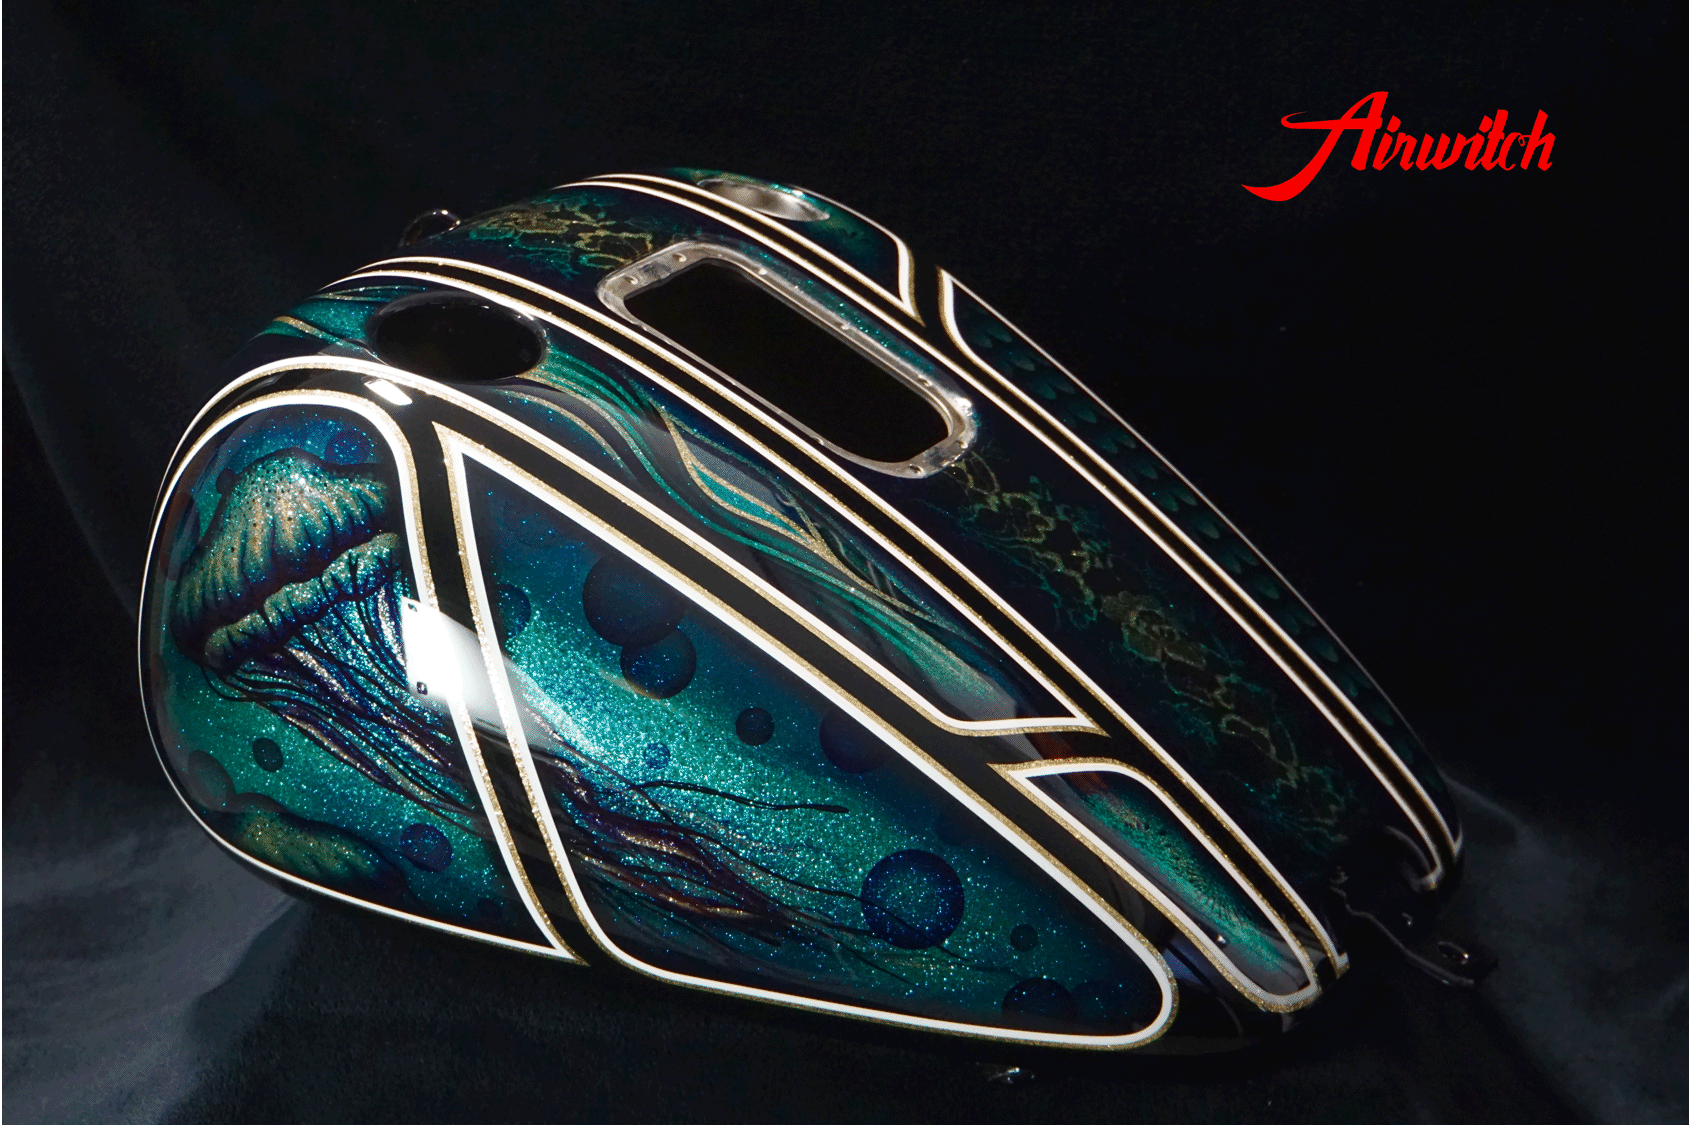 Custom Paint Harley Davidson Softail Metalflake Lackierung with bubbles jellyfish blue turquoise gold black  